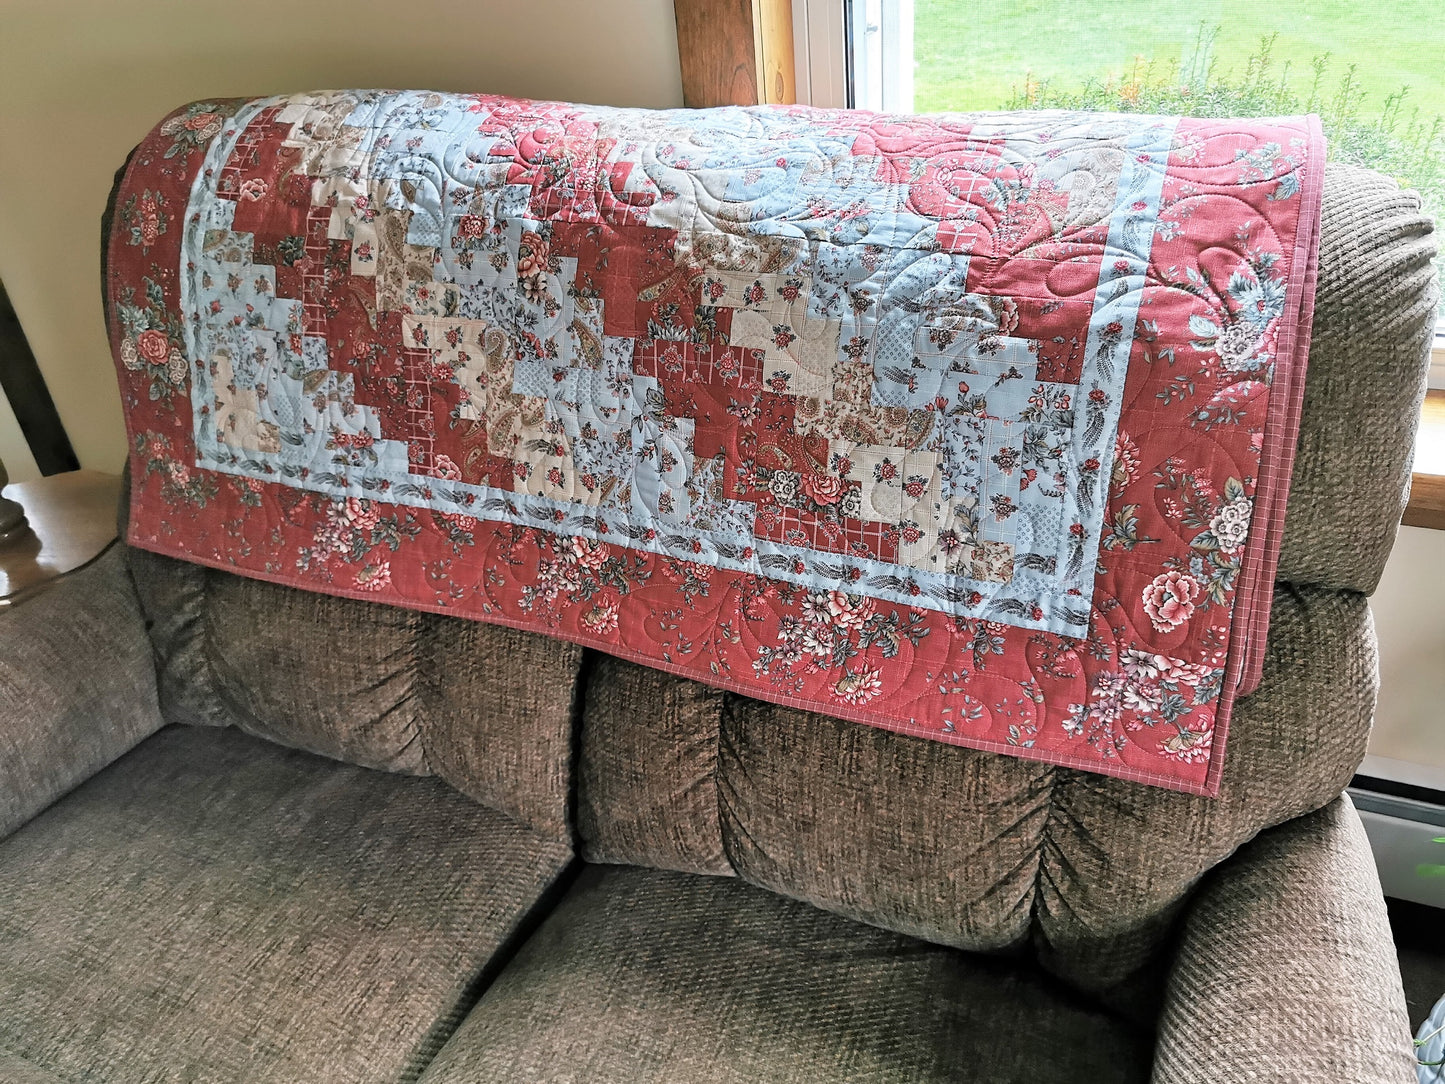 Floral Log Cabin Throw Quilt